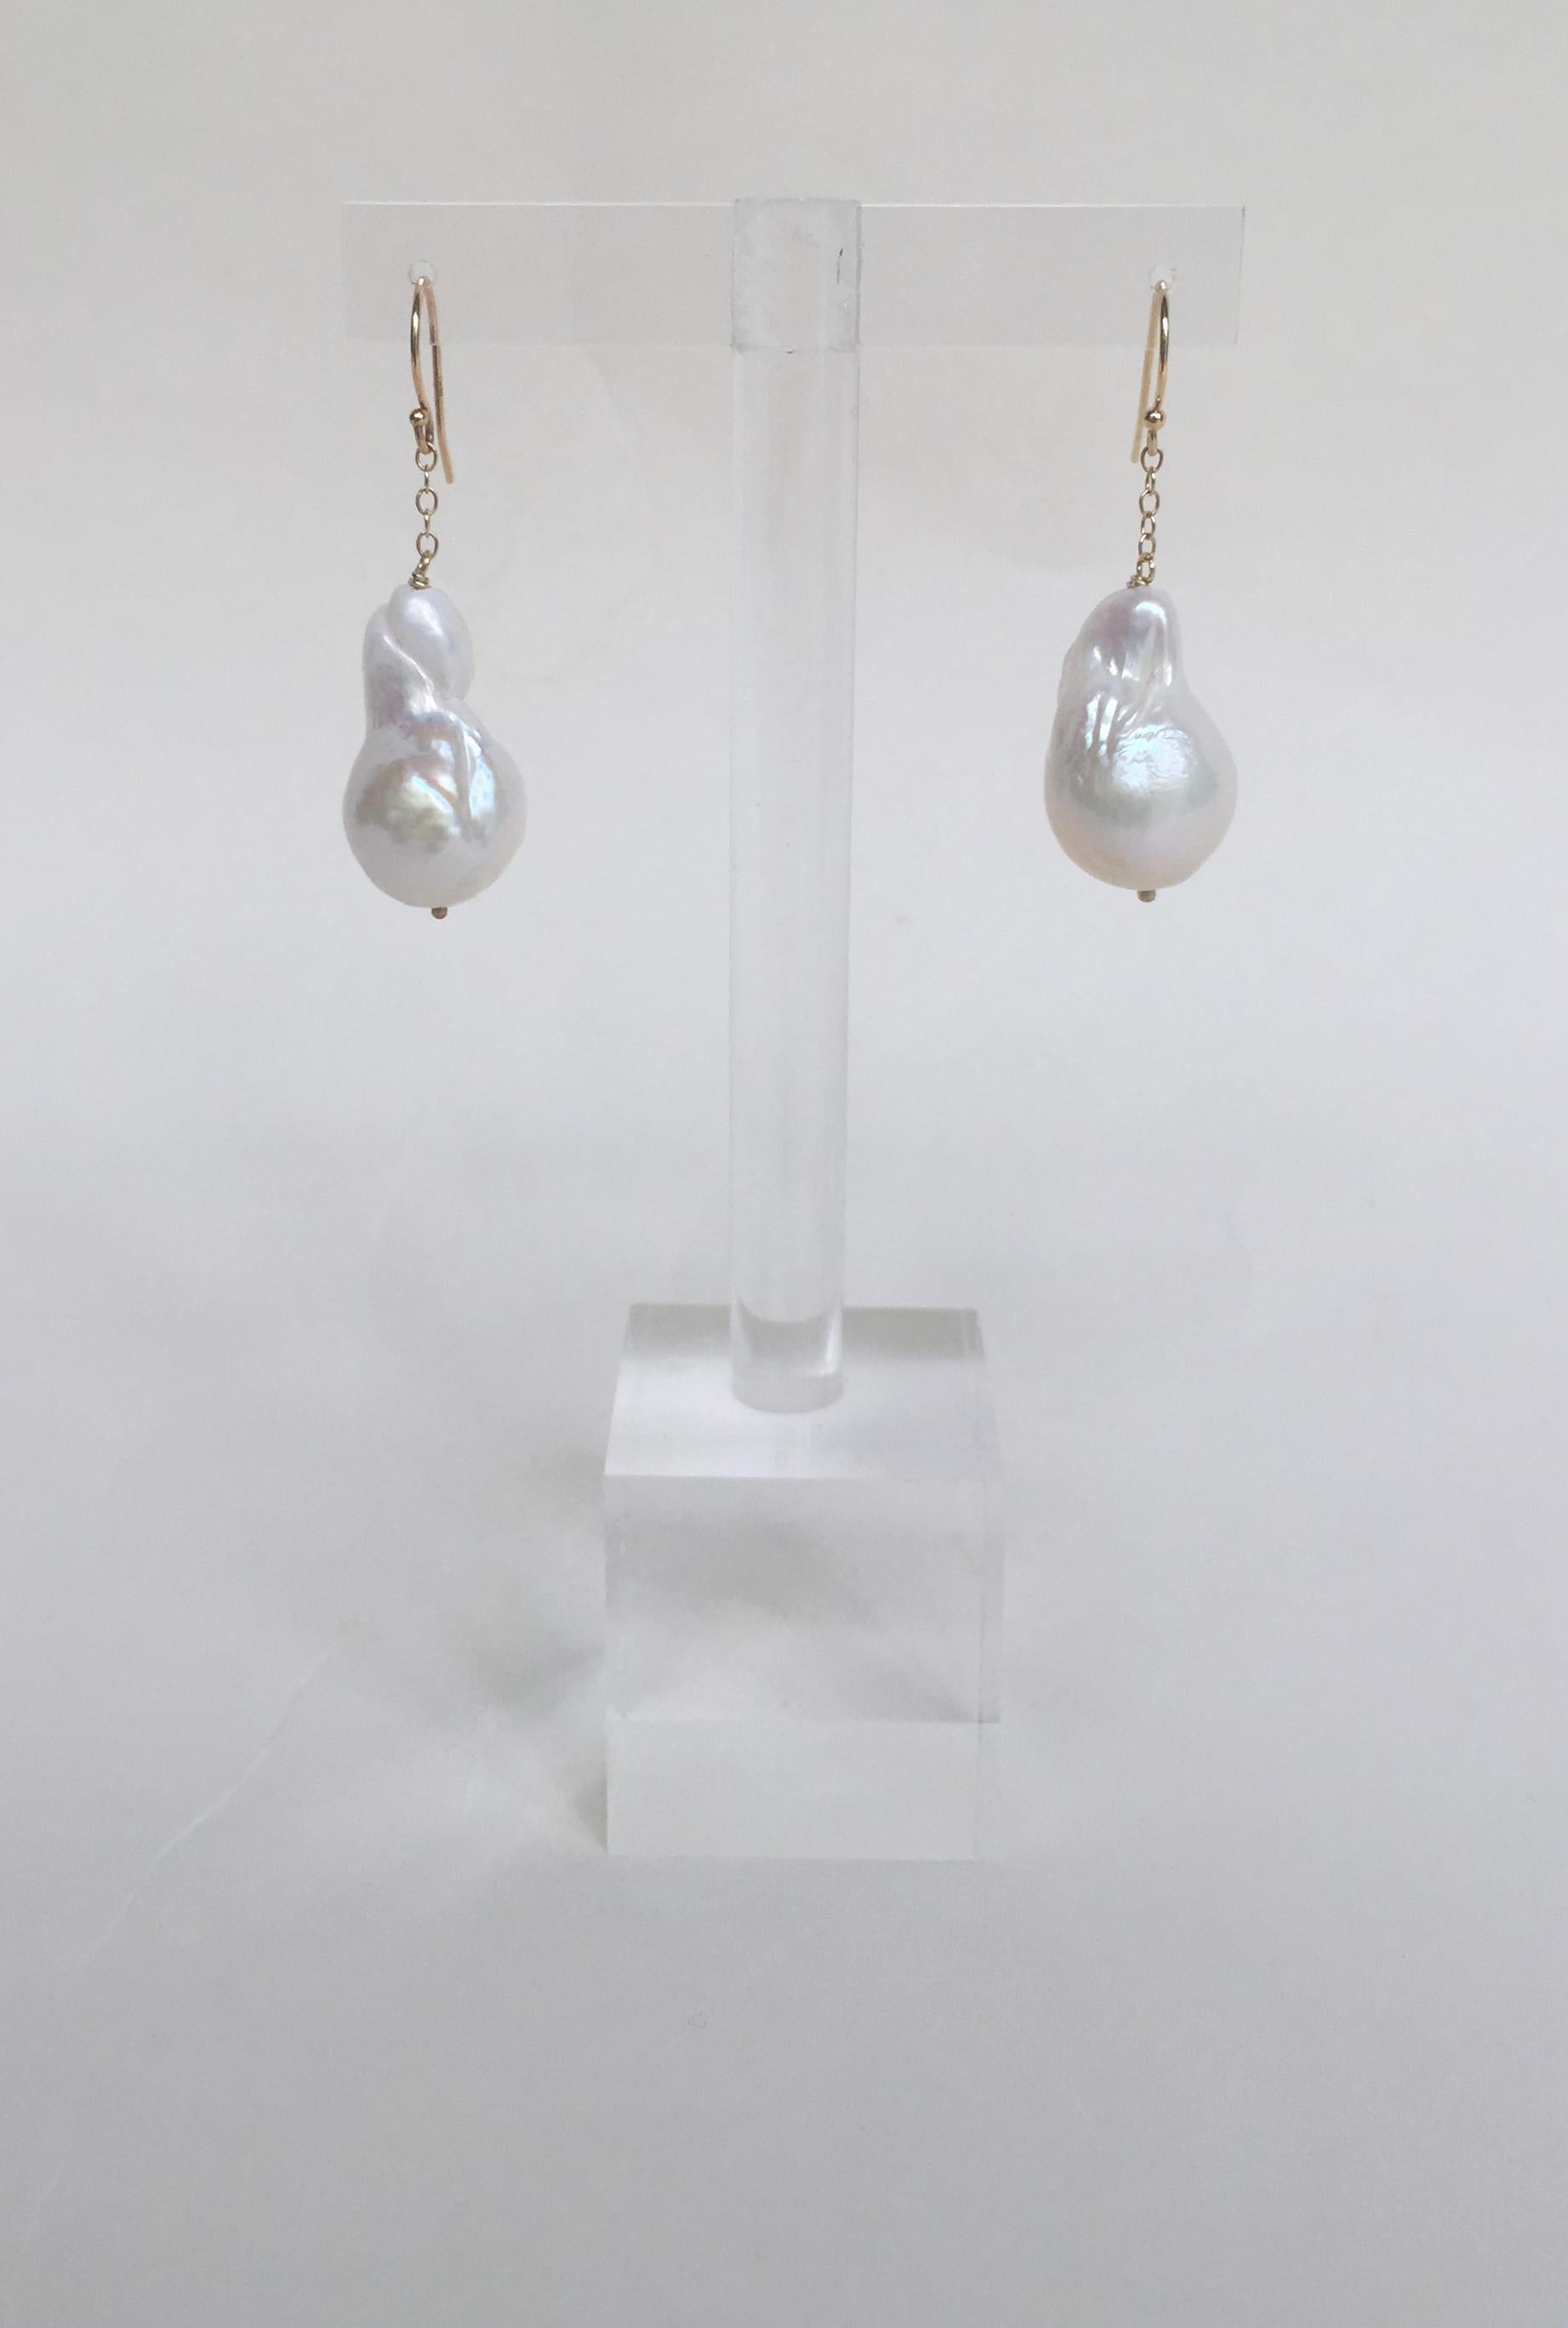 These baroque white pearl dangle earrings with 14k yellow gold chain and hook are stunning. A large baroque white pearl hangs from the 14 yellow gold, giving these dangle earrings drama as they sway with movement. The 14k yellow gold hooks complete